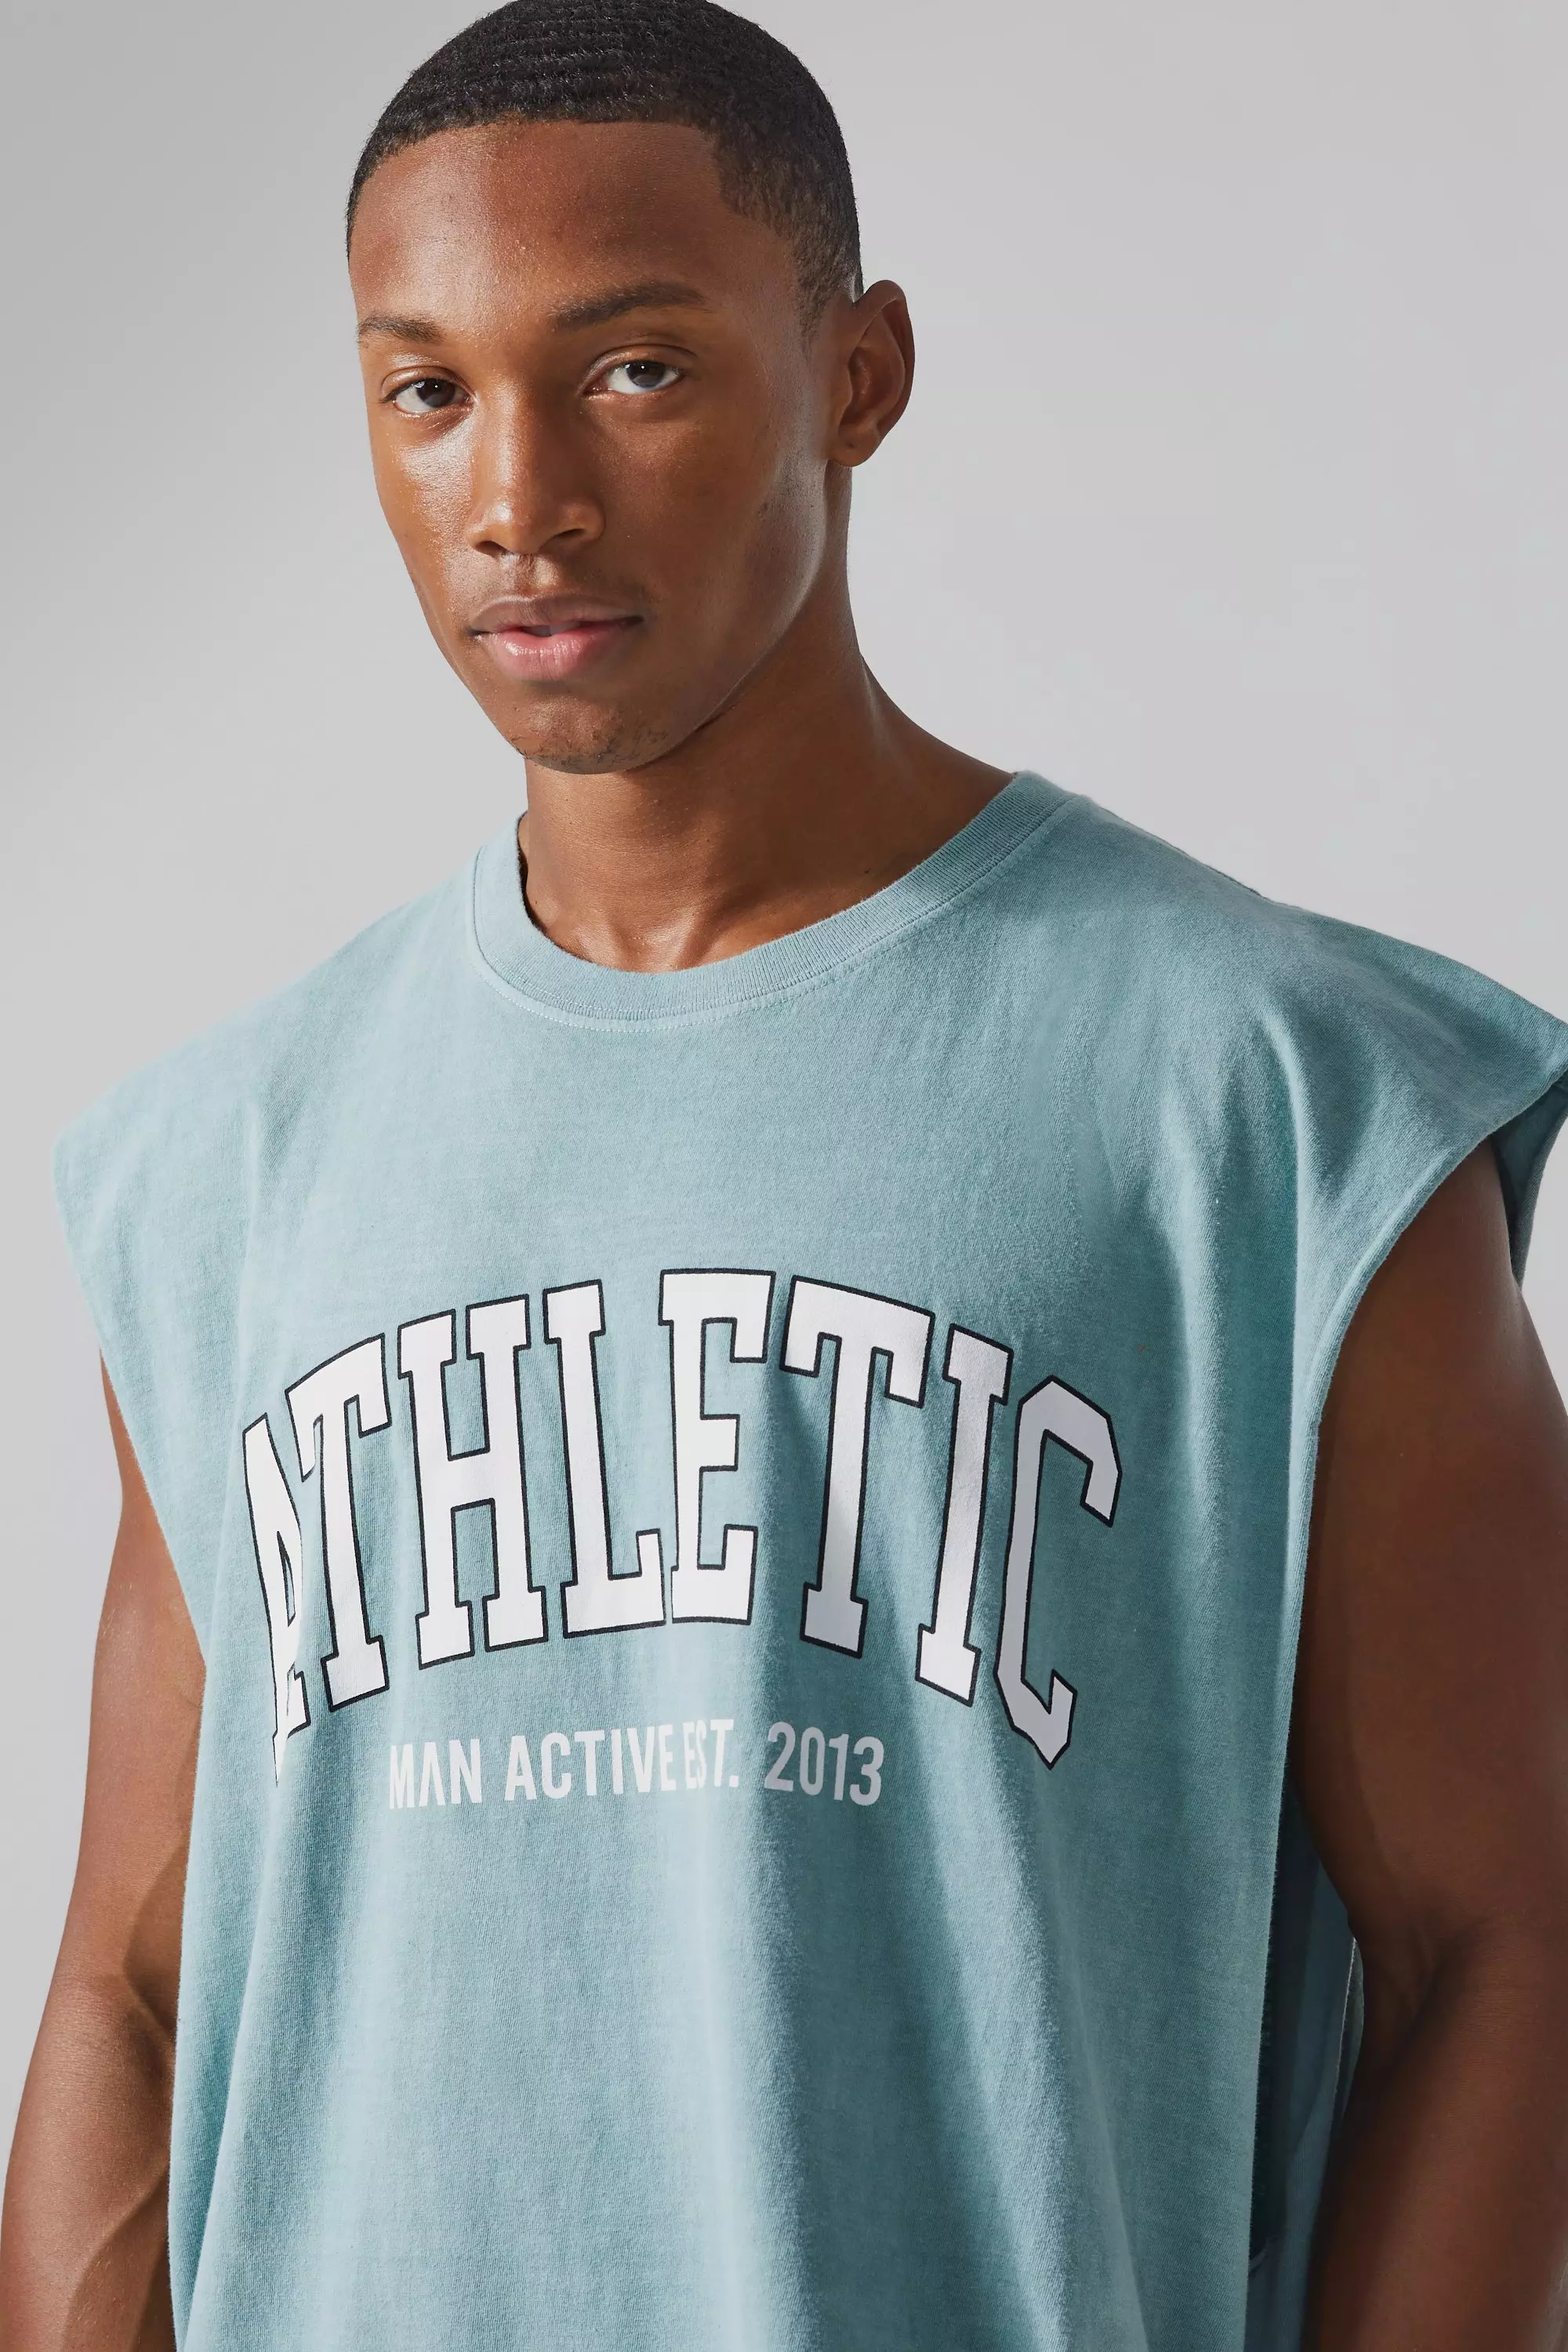 Man Active Gym Athletic Cut Off Tank